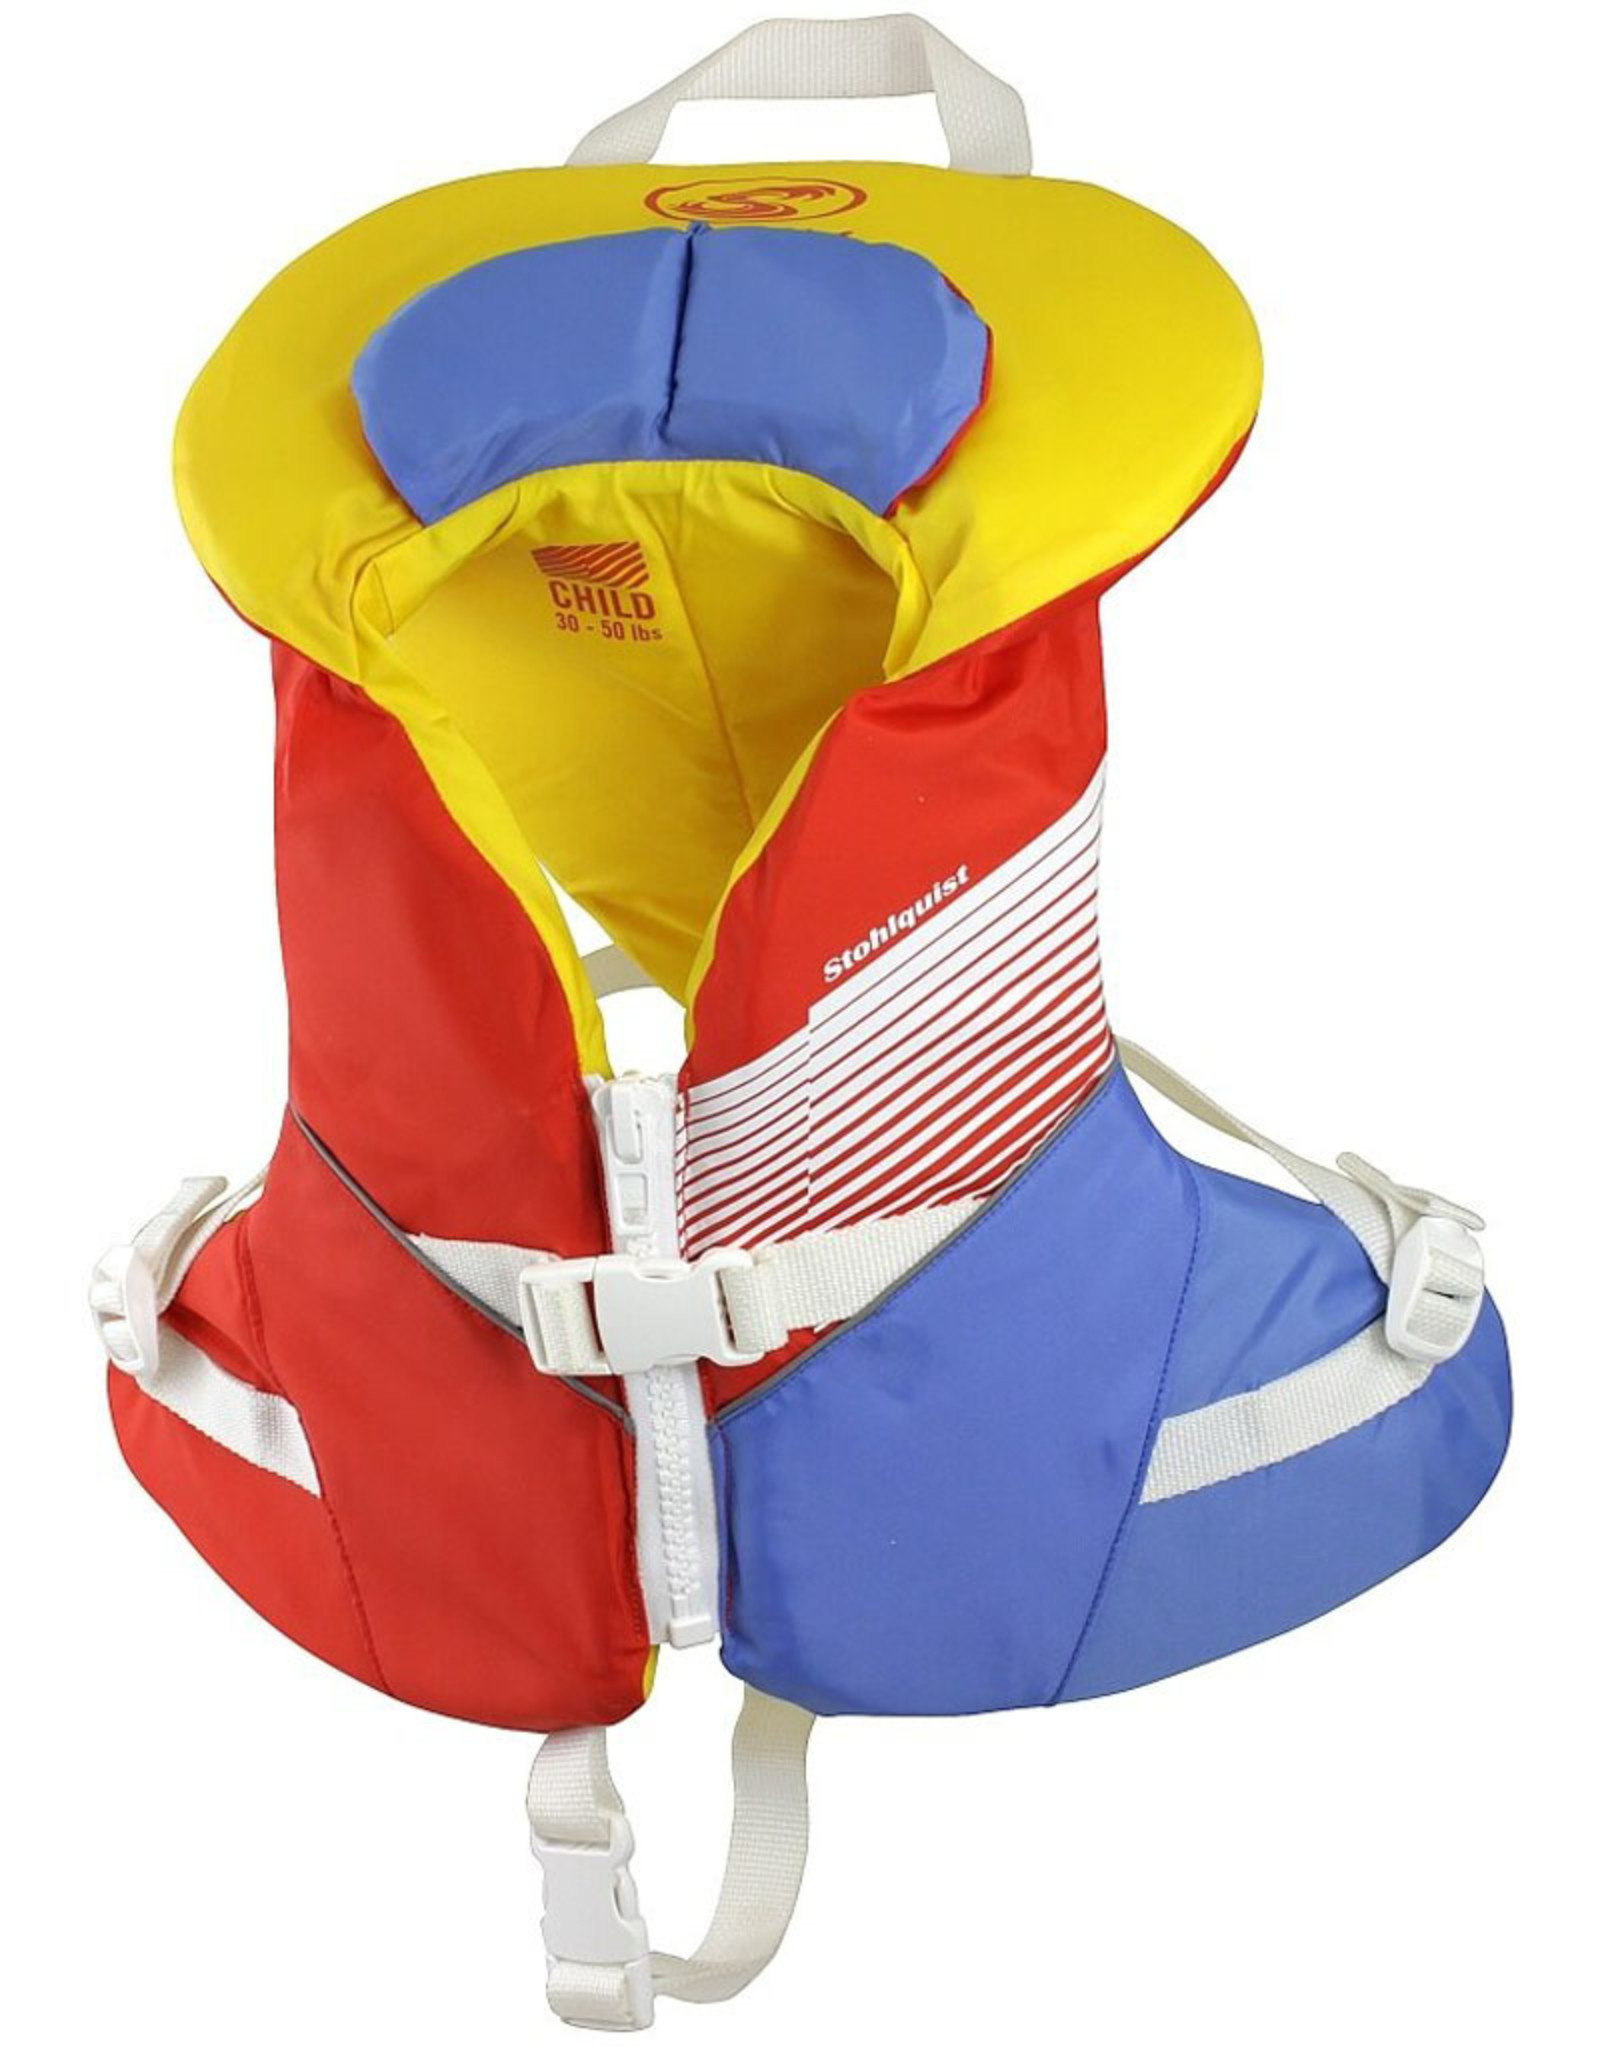 Stohlquist Stohlquist Infant/Child PFD - Discontinued